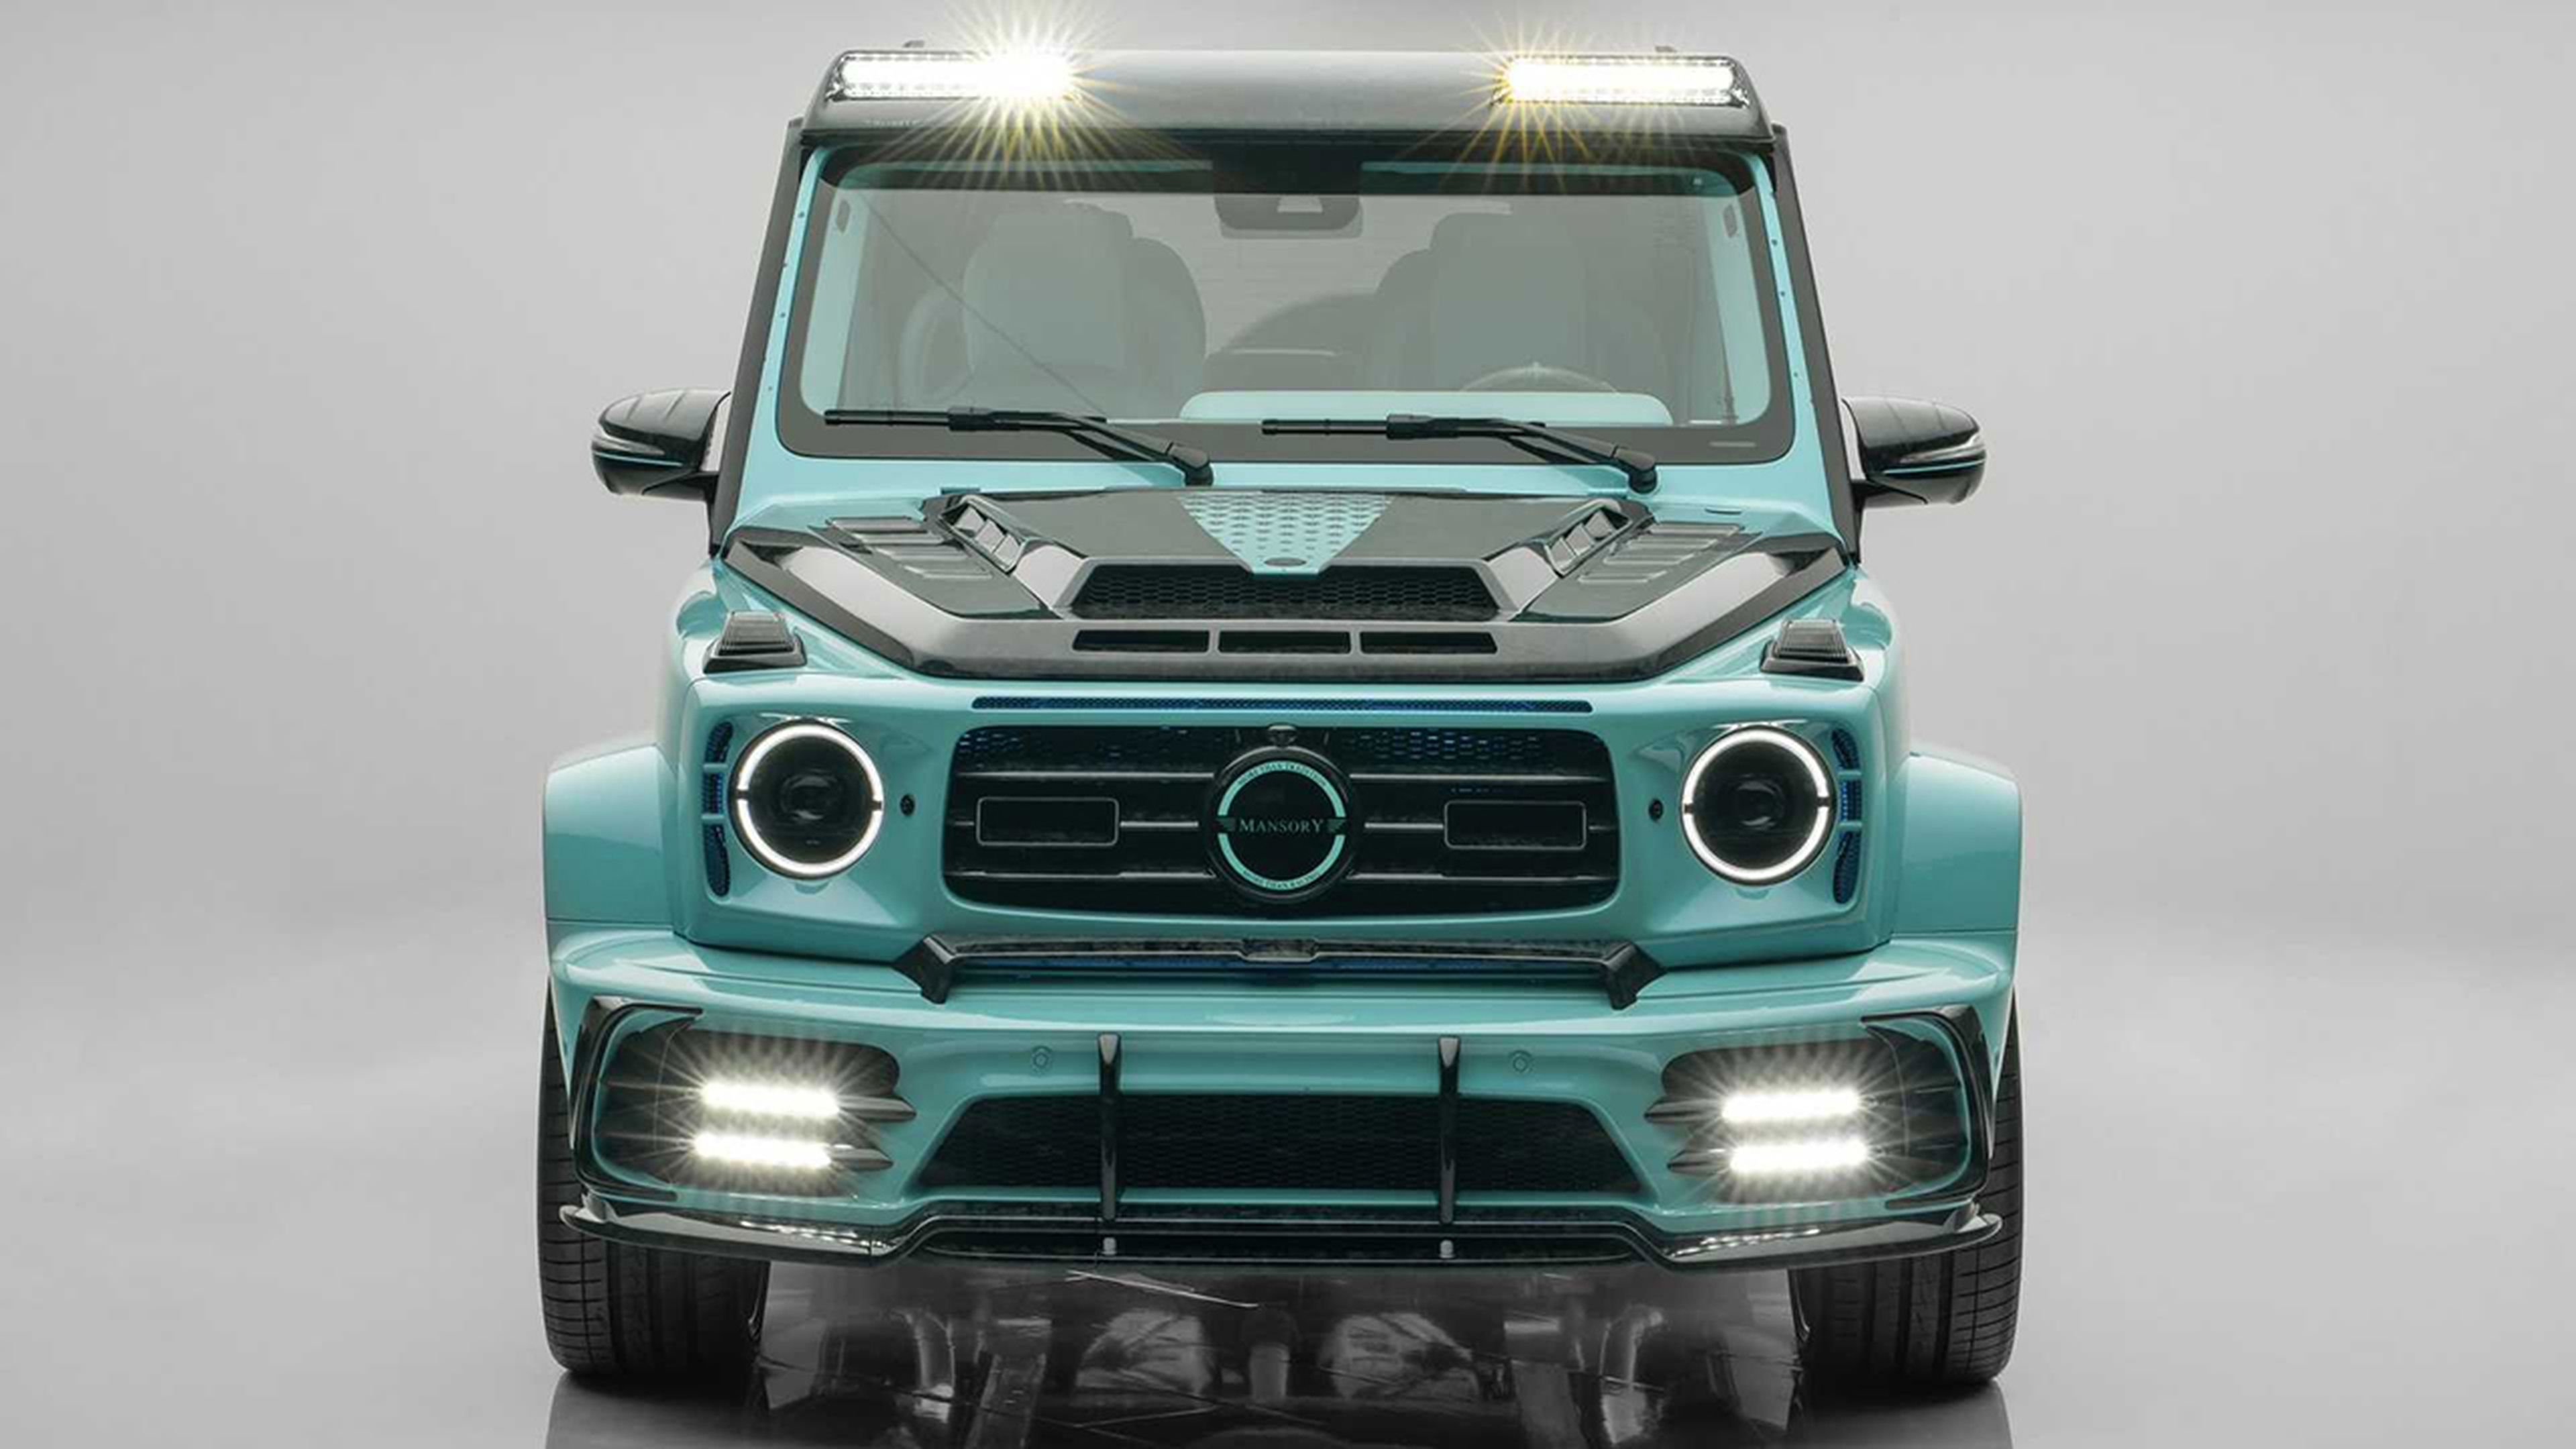 Mercedes AMG G-63 by Mansory (2)